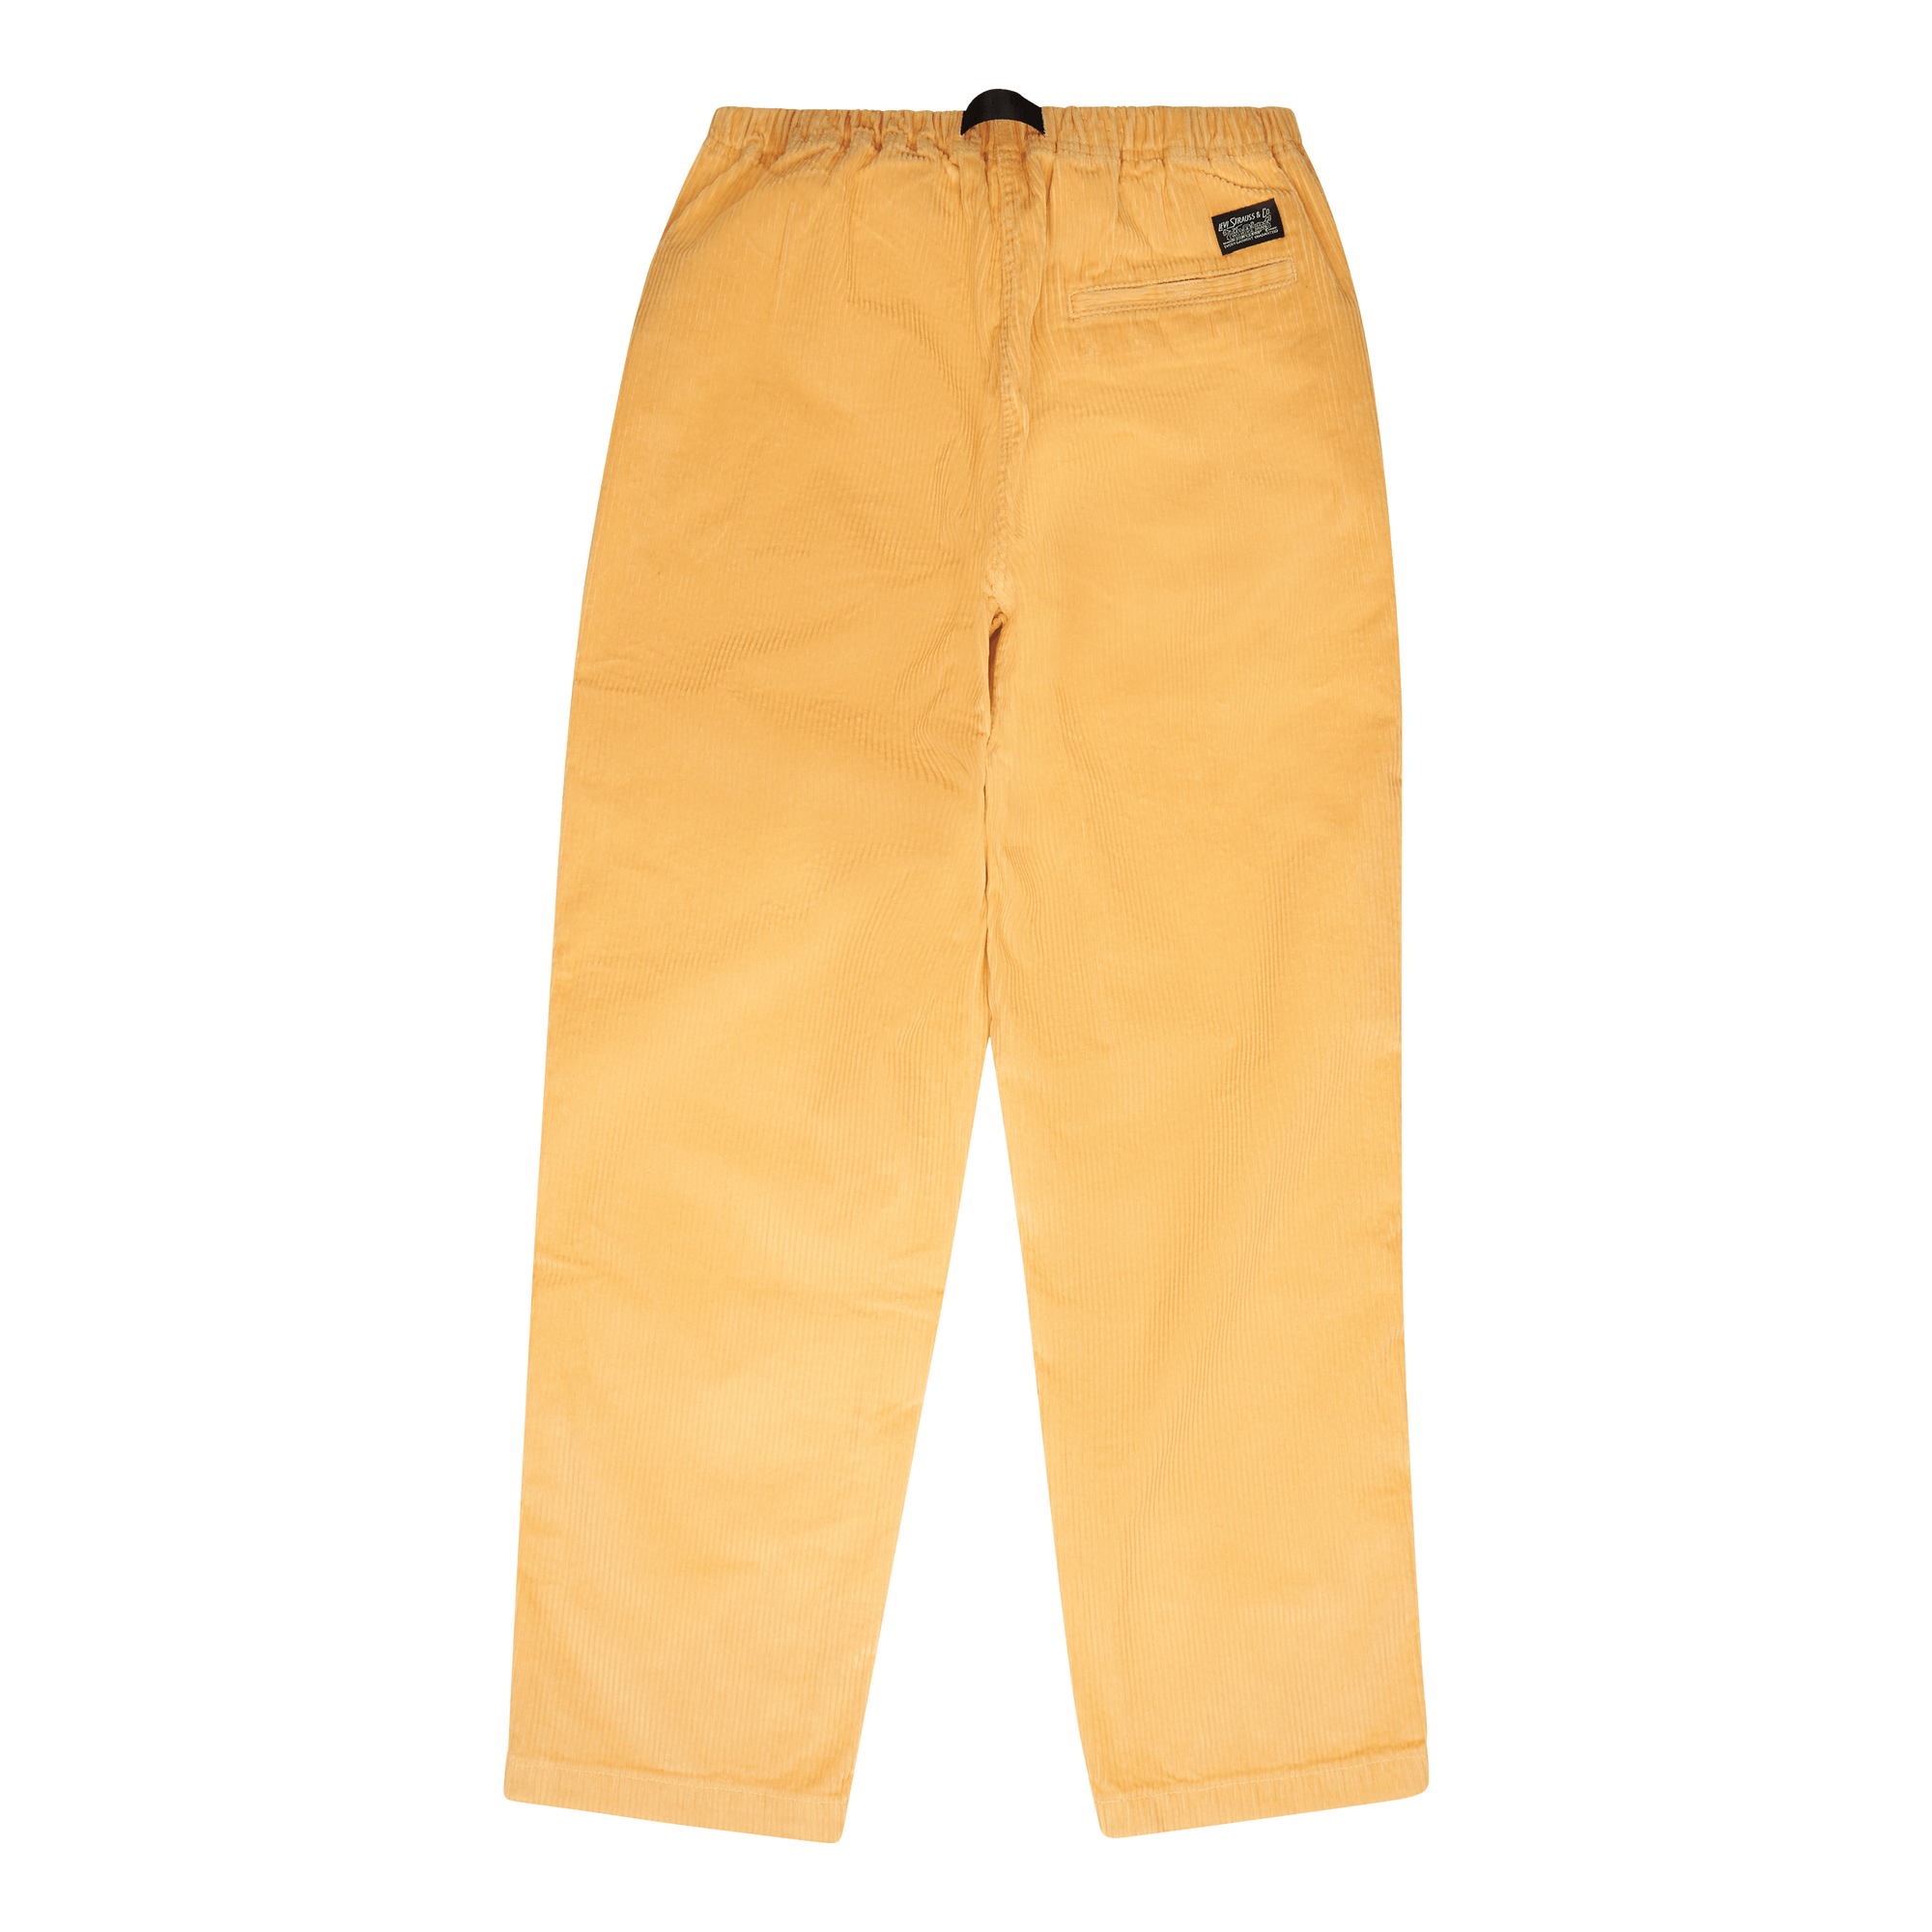 Skate Quick Release Pant Yellows/oranges